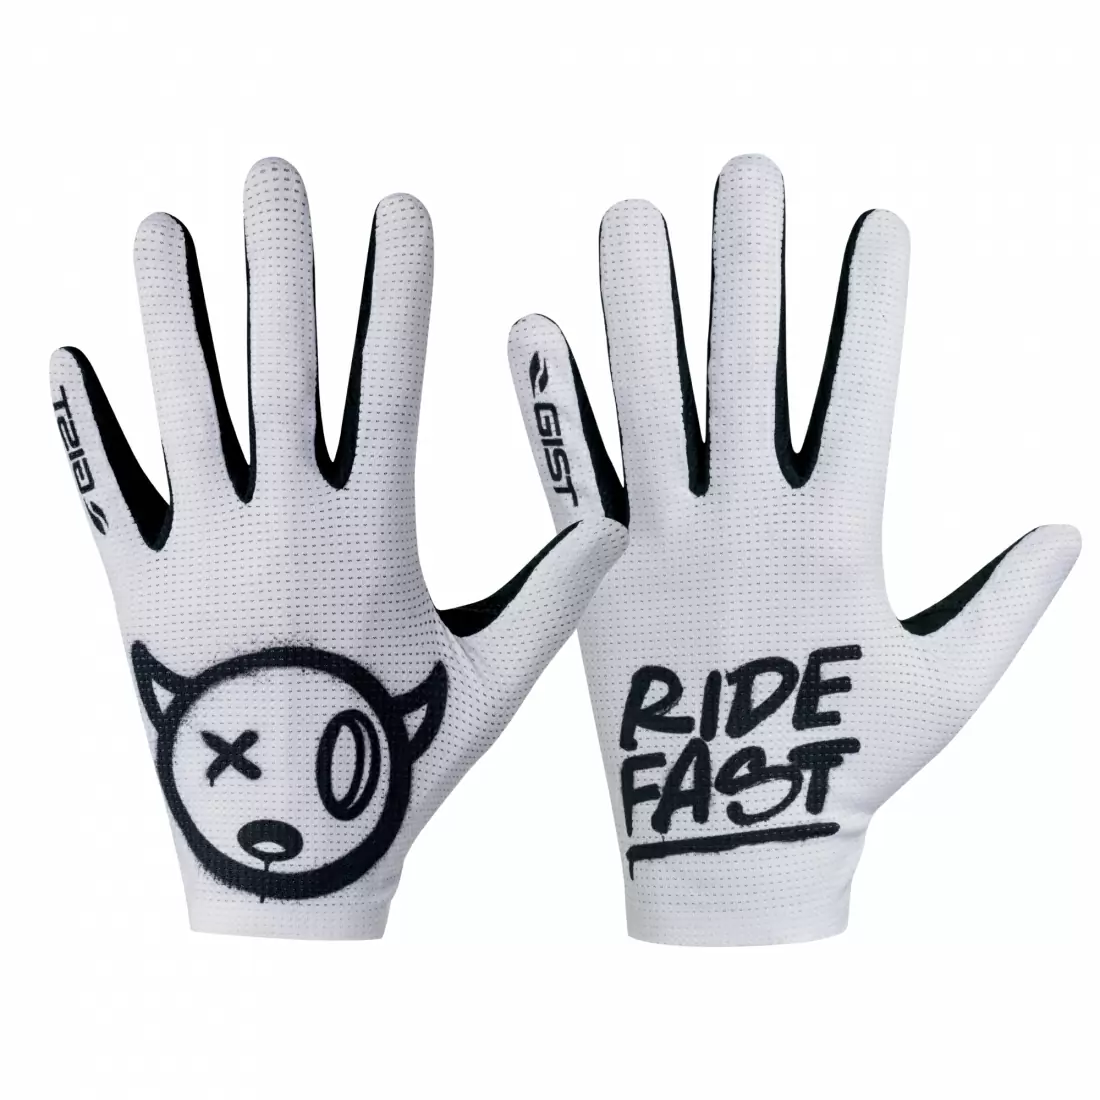 Gants Faster Blanc Taille S - image